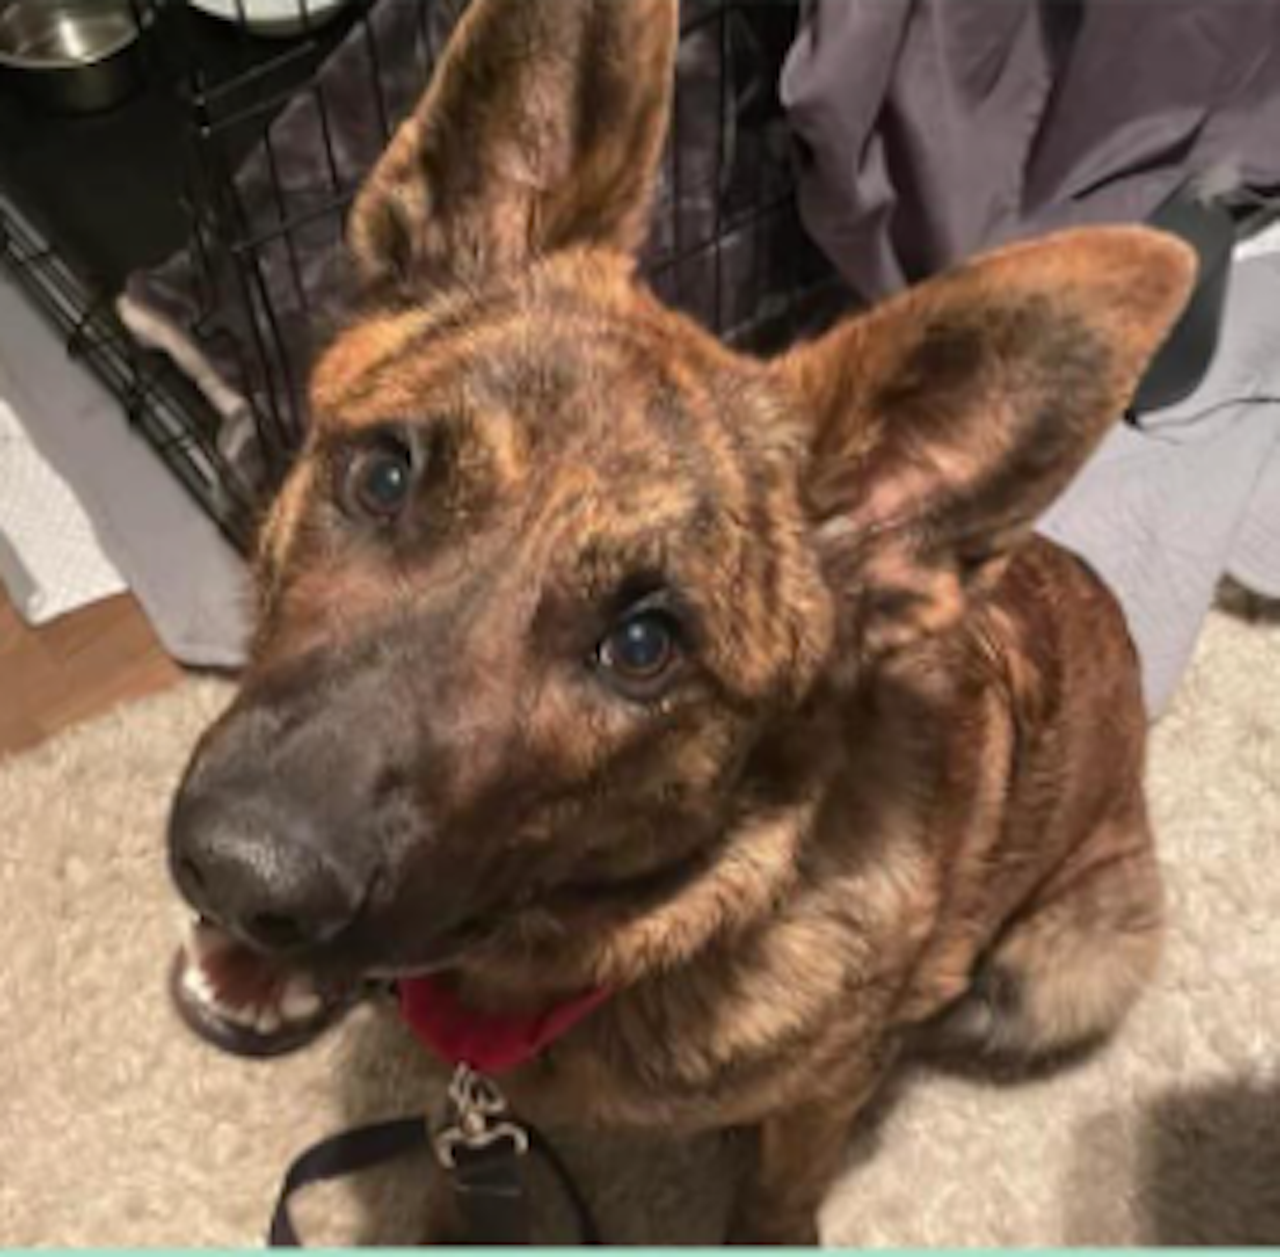 Guinness
A146342
Male Shepherd, Neutered, Microchipped and UTD on vaccinations
Estimated to be 2 years old, 61 pounds
Medium to High Energy
Recovering from a broken leg, surgery on 3-12-2022, staples were removed 3-25-2022
Dog Friendly - would love to have a friend about his size and wants to play (slow introductions and monitoring a must due to leg healing)
Knows basic commands (sit, down, touch)
Listens well
Walks nicely on leash with harness
Crate Trained - sleeps in a crate all night
He has typical shepherd behavior; follows you everywhere, curious, at little mischievous, playful, and friendly to people. 
Very Trainable - he is very attentive and treat motivated 
Ideal foster or adopter has breed experience
Heart worm Positive - when he is ready for treatment it will be done at Detroit Animal Care and Control and paid for by Friends of Detroit Animal Care and Control
Probably best not in a home with small children, he gets really excited and barks and knocks them over trying to play.
He has not met cats
He settled very nicely into my home and routine in one week. 